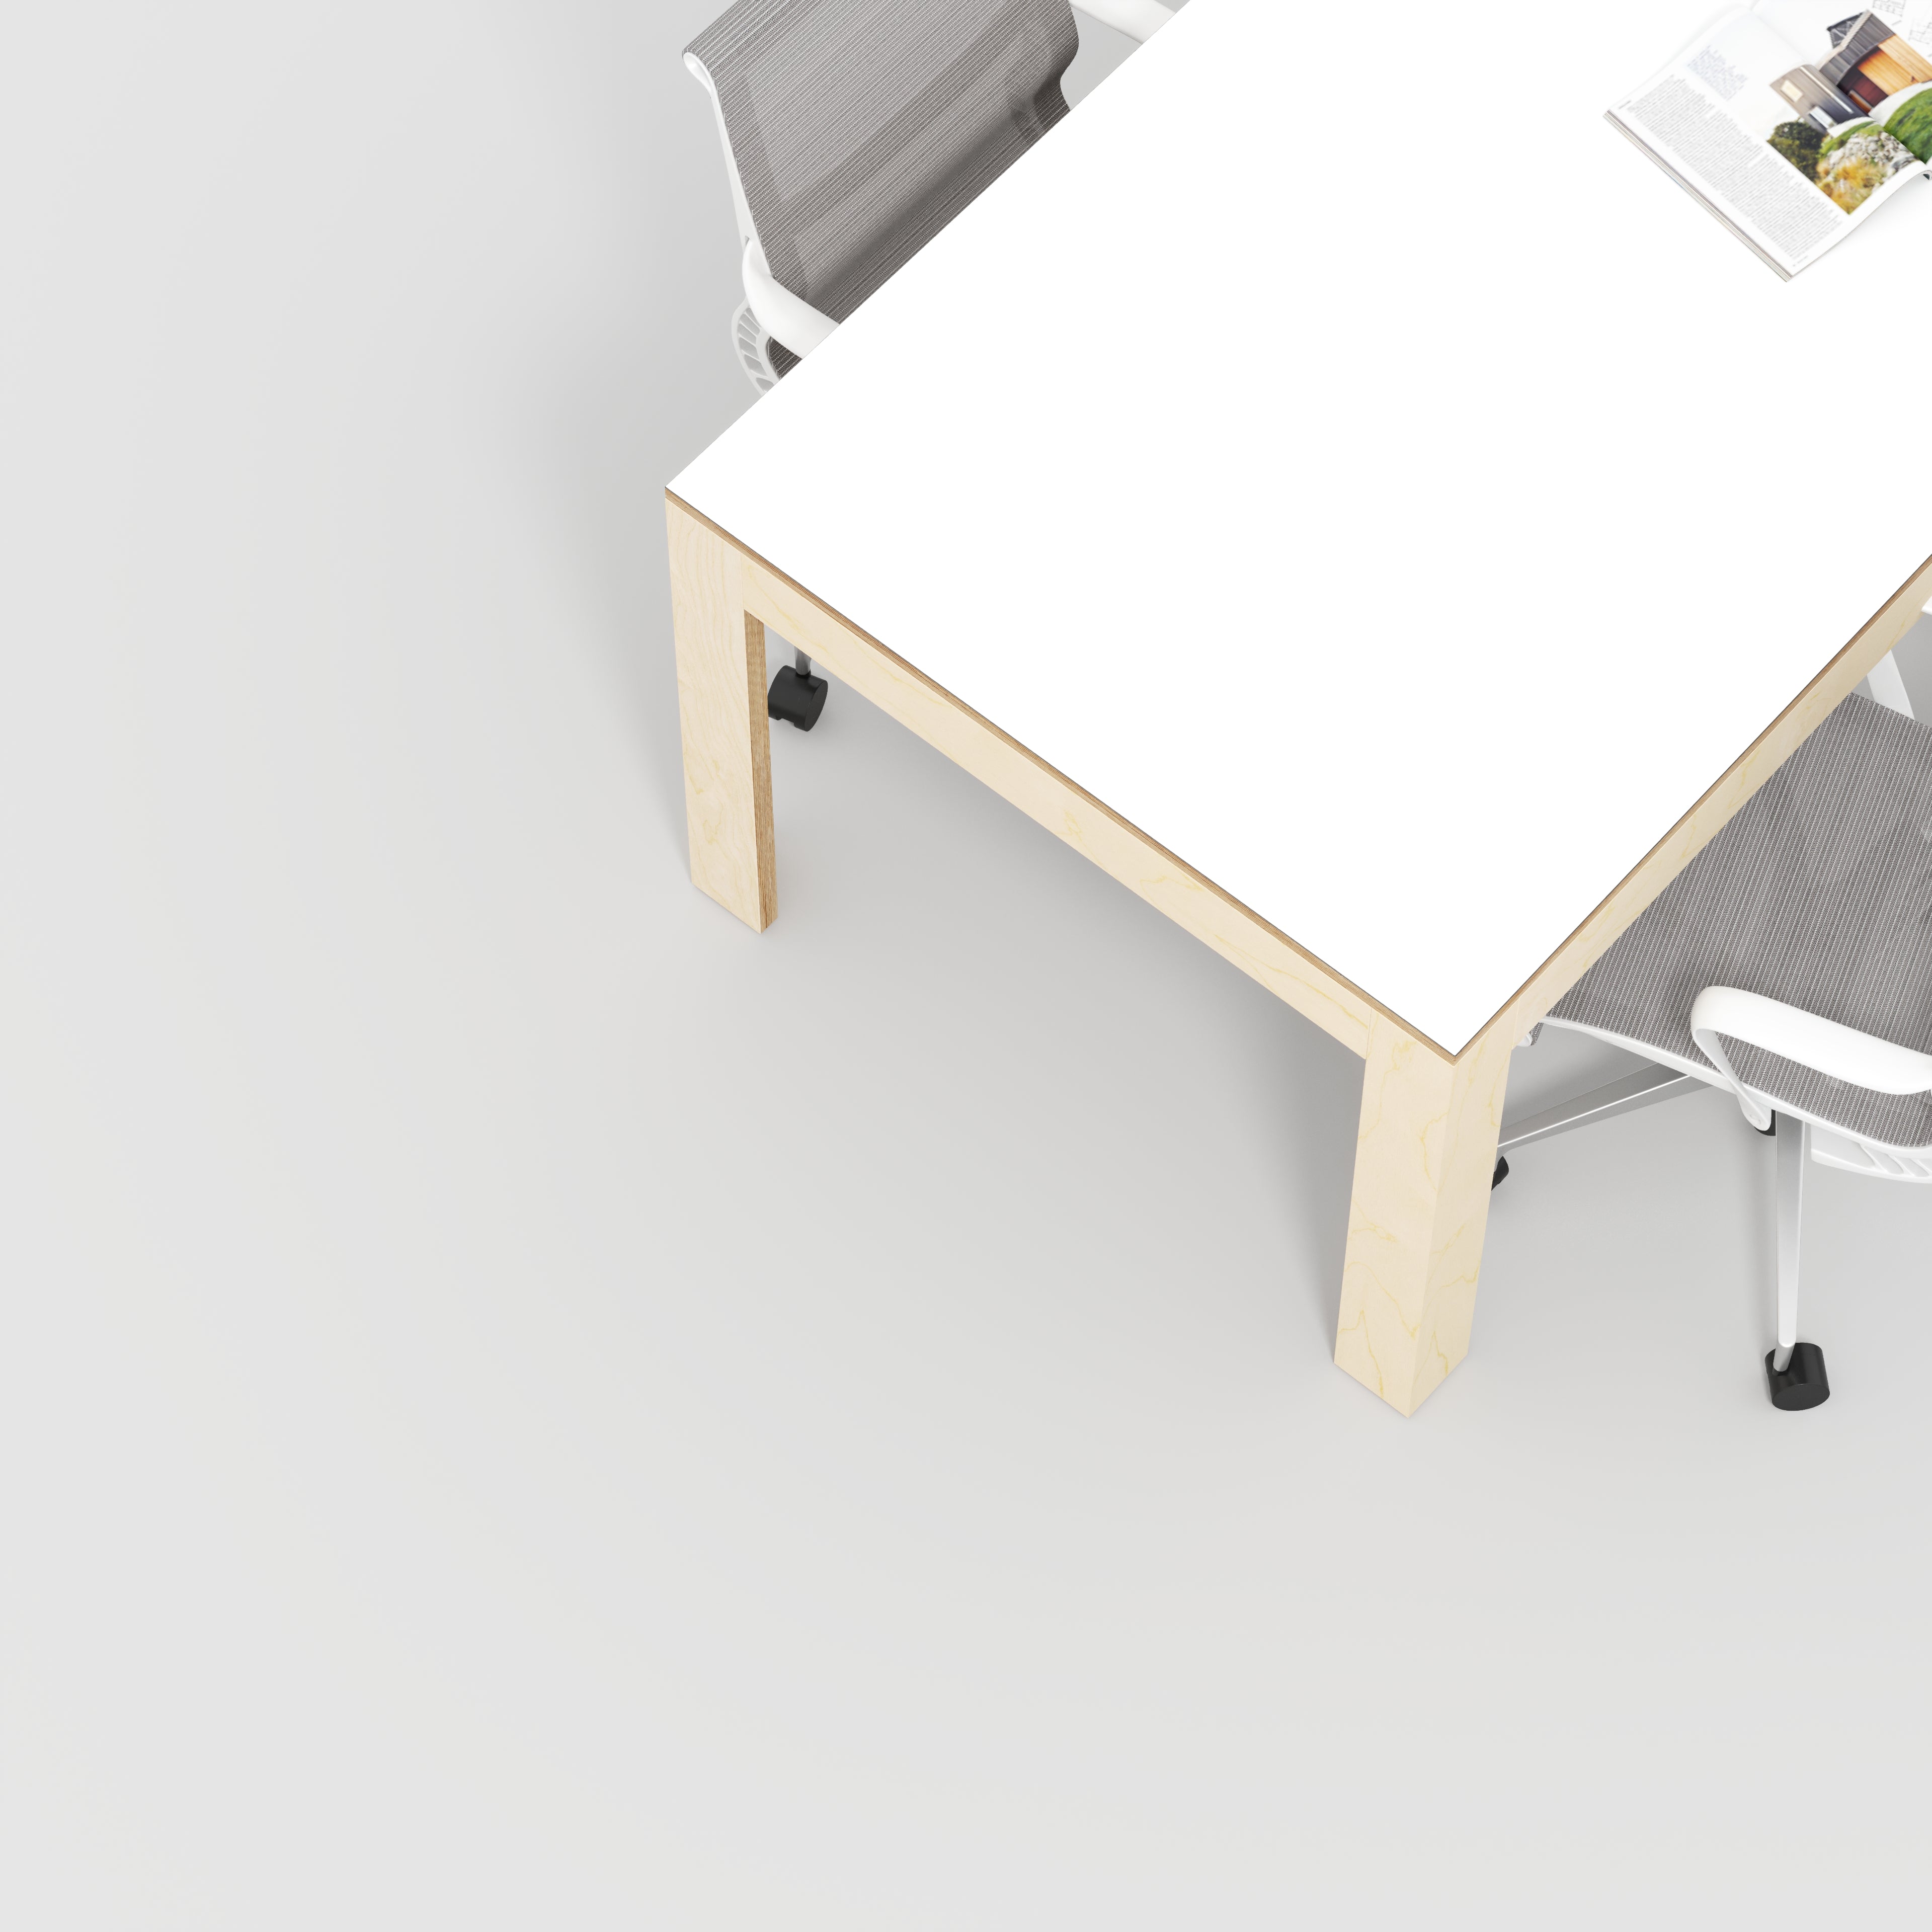 Table with Solid Frame - Formica White - 2000(w) x 1000(d) x 750(h)